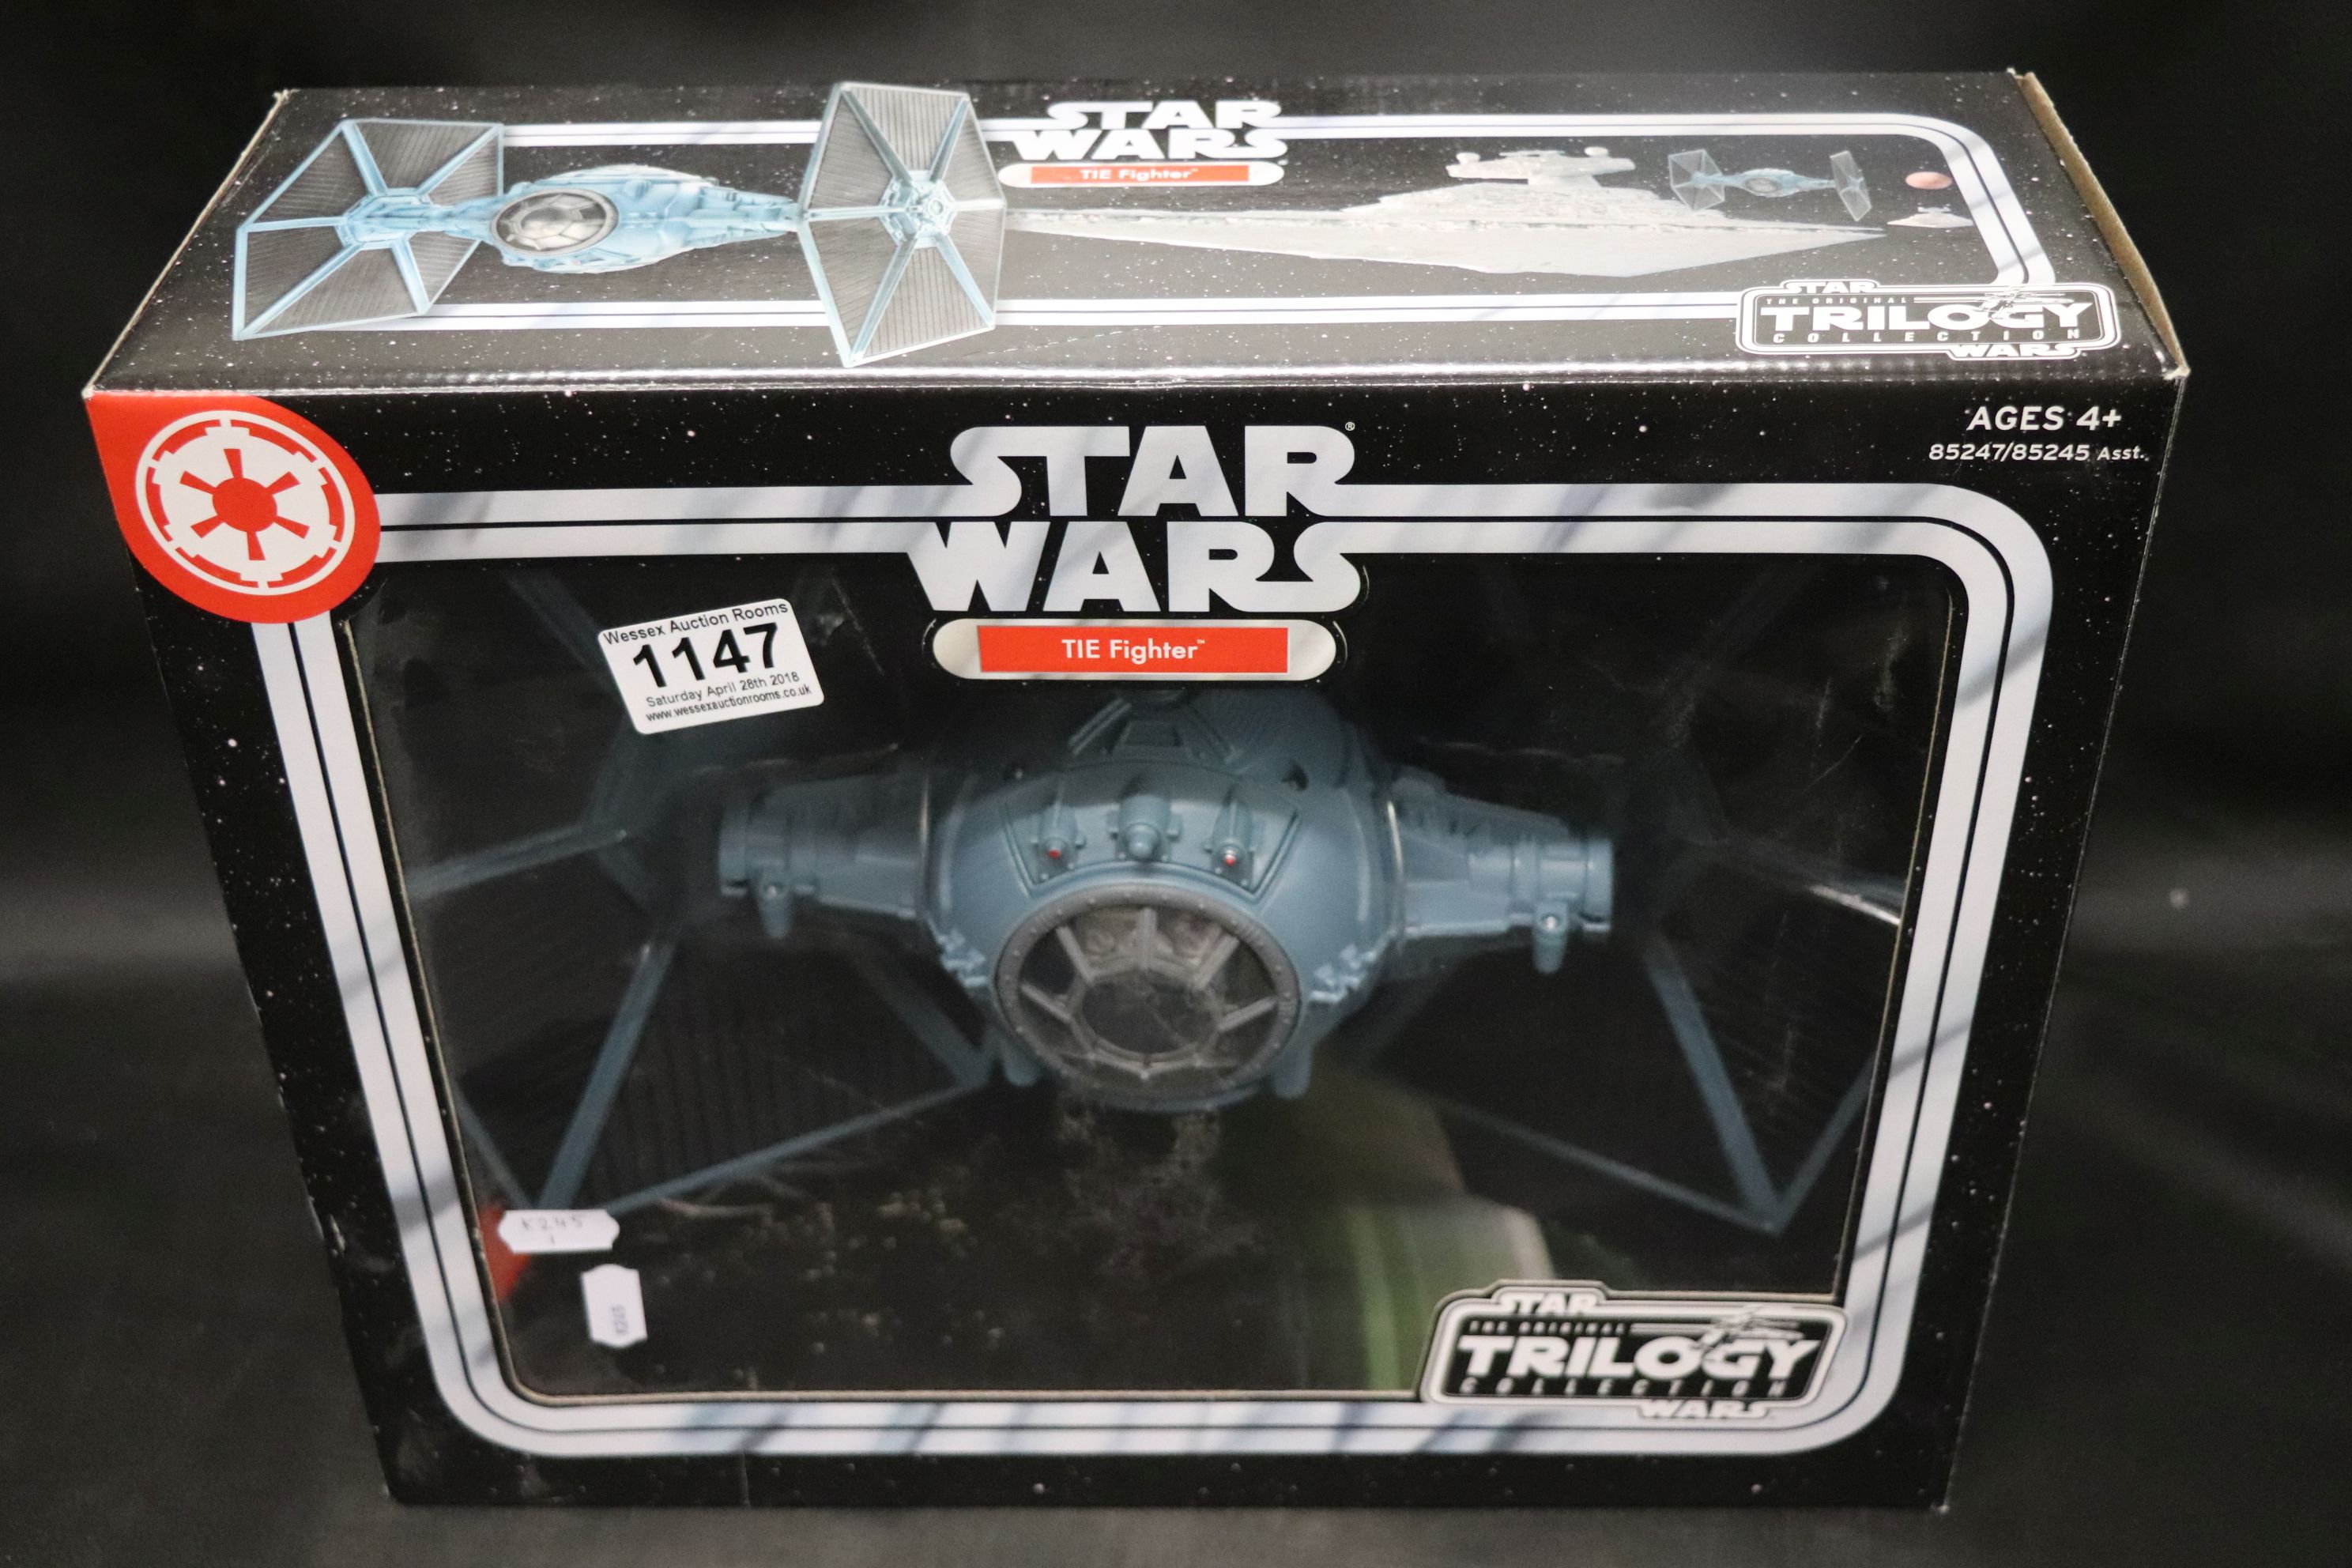 Boxed Hasbro Star Wars Original Trilogy Collection Tie Fighter in excellent condition